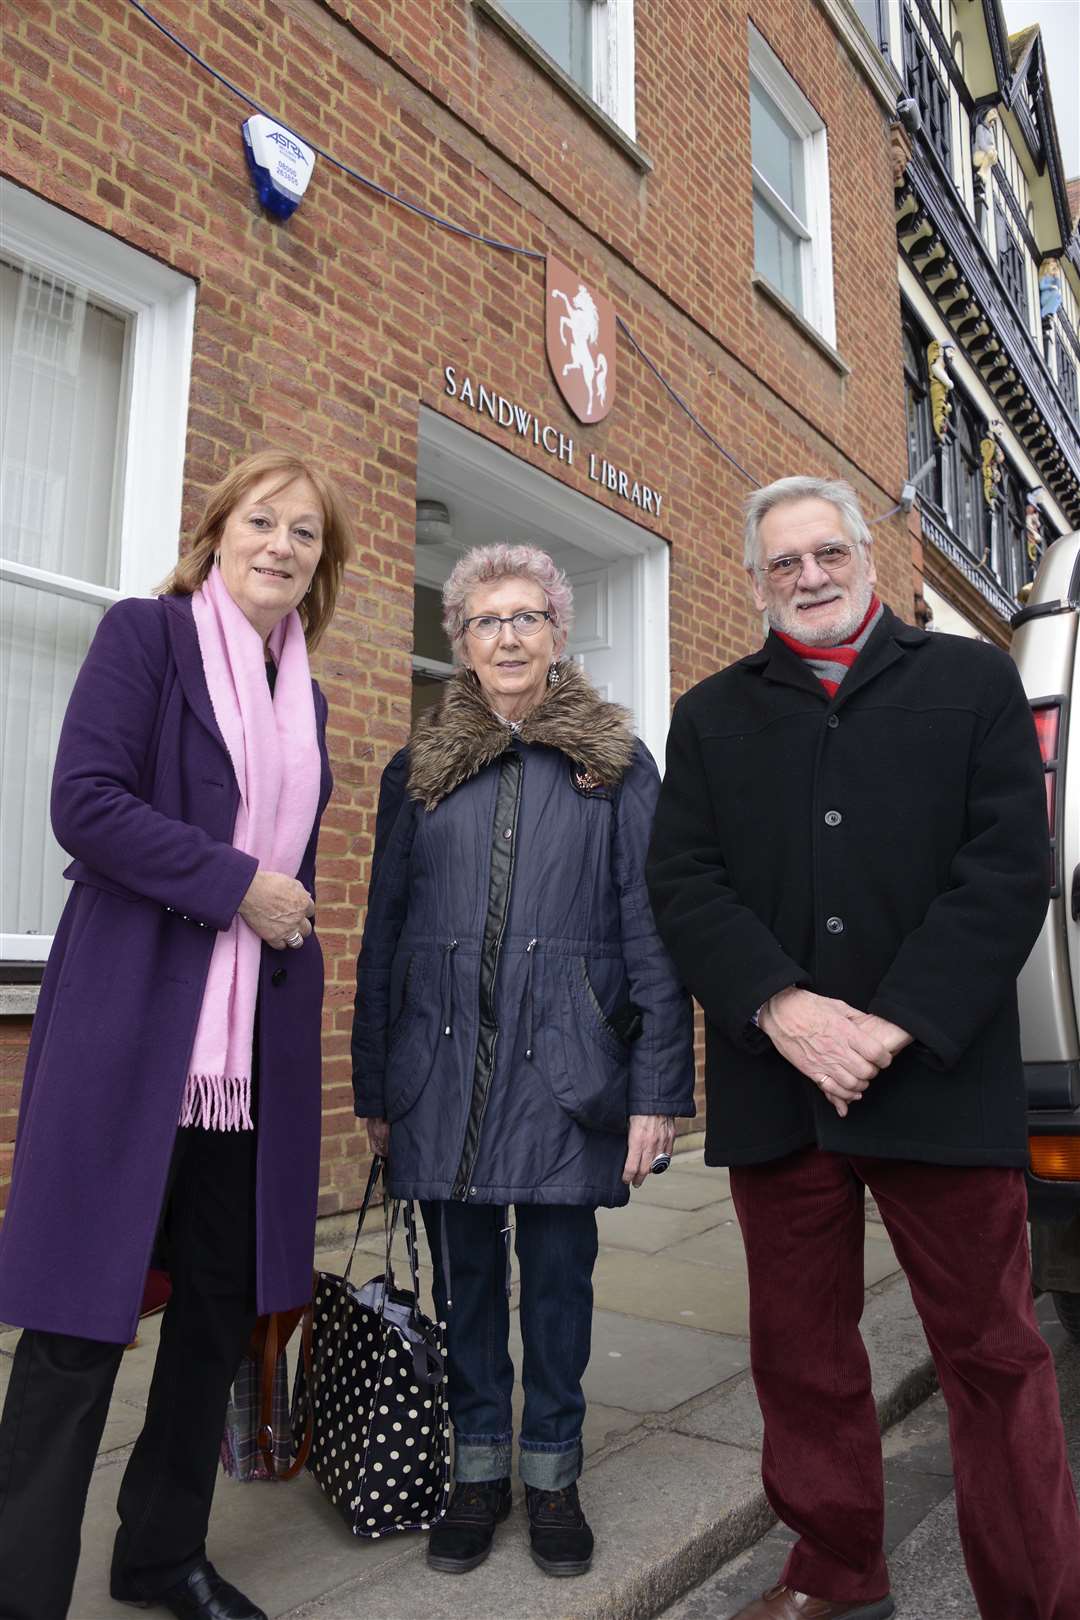 Sandwich Library Guild members Margaret Simpson,Cilla Phillips and Robert Tomlins